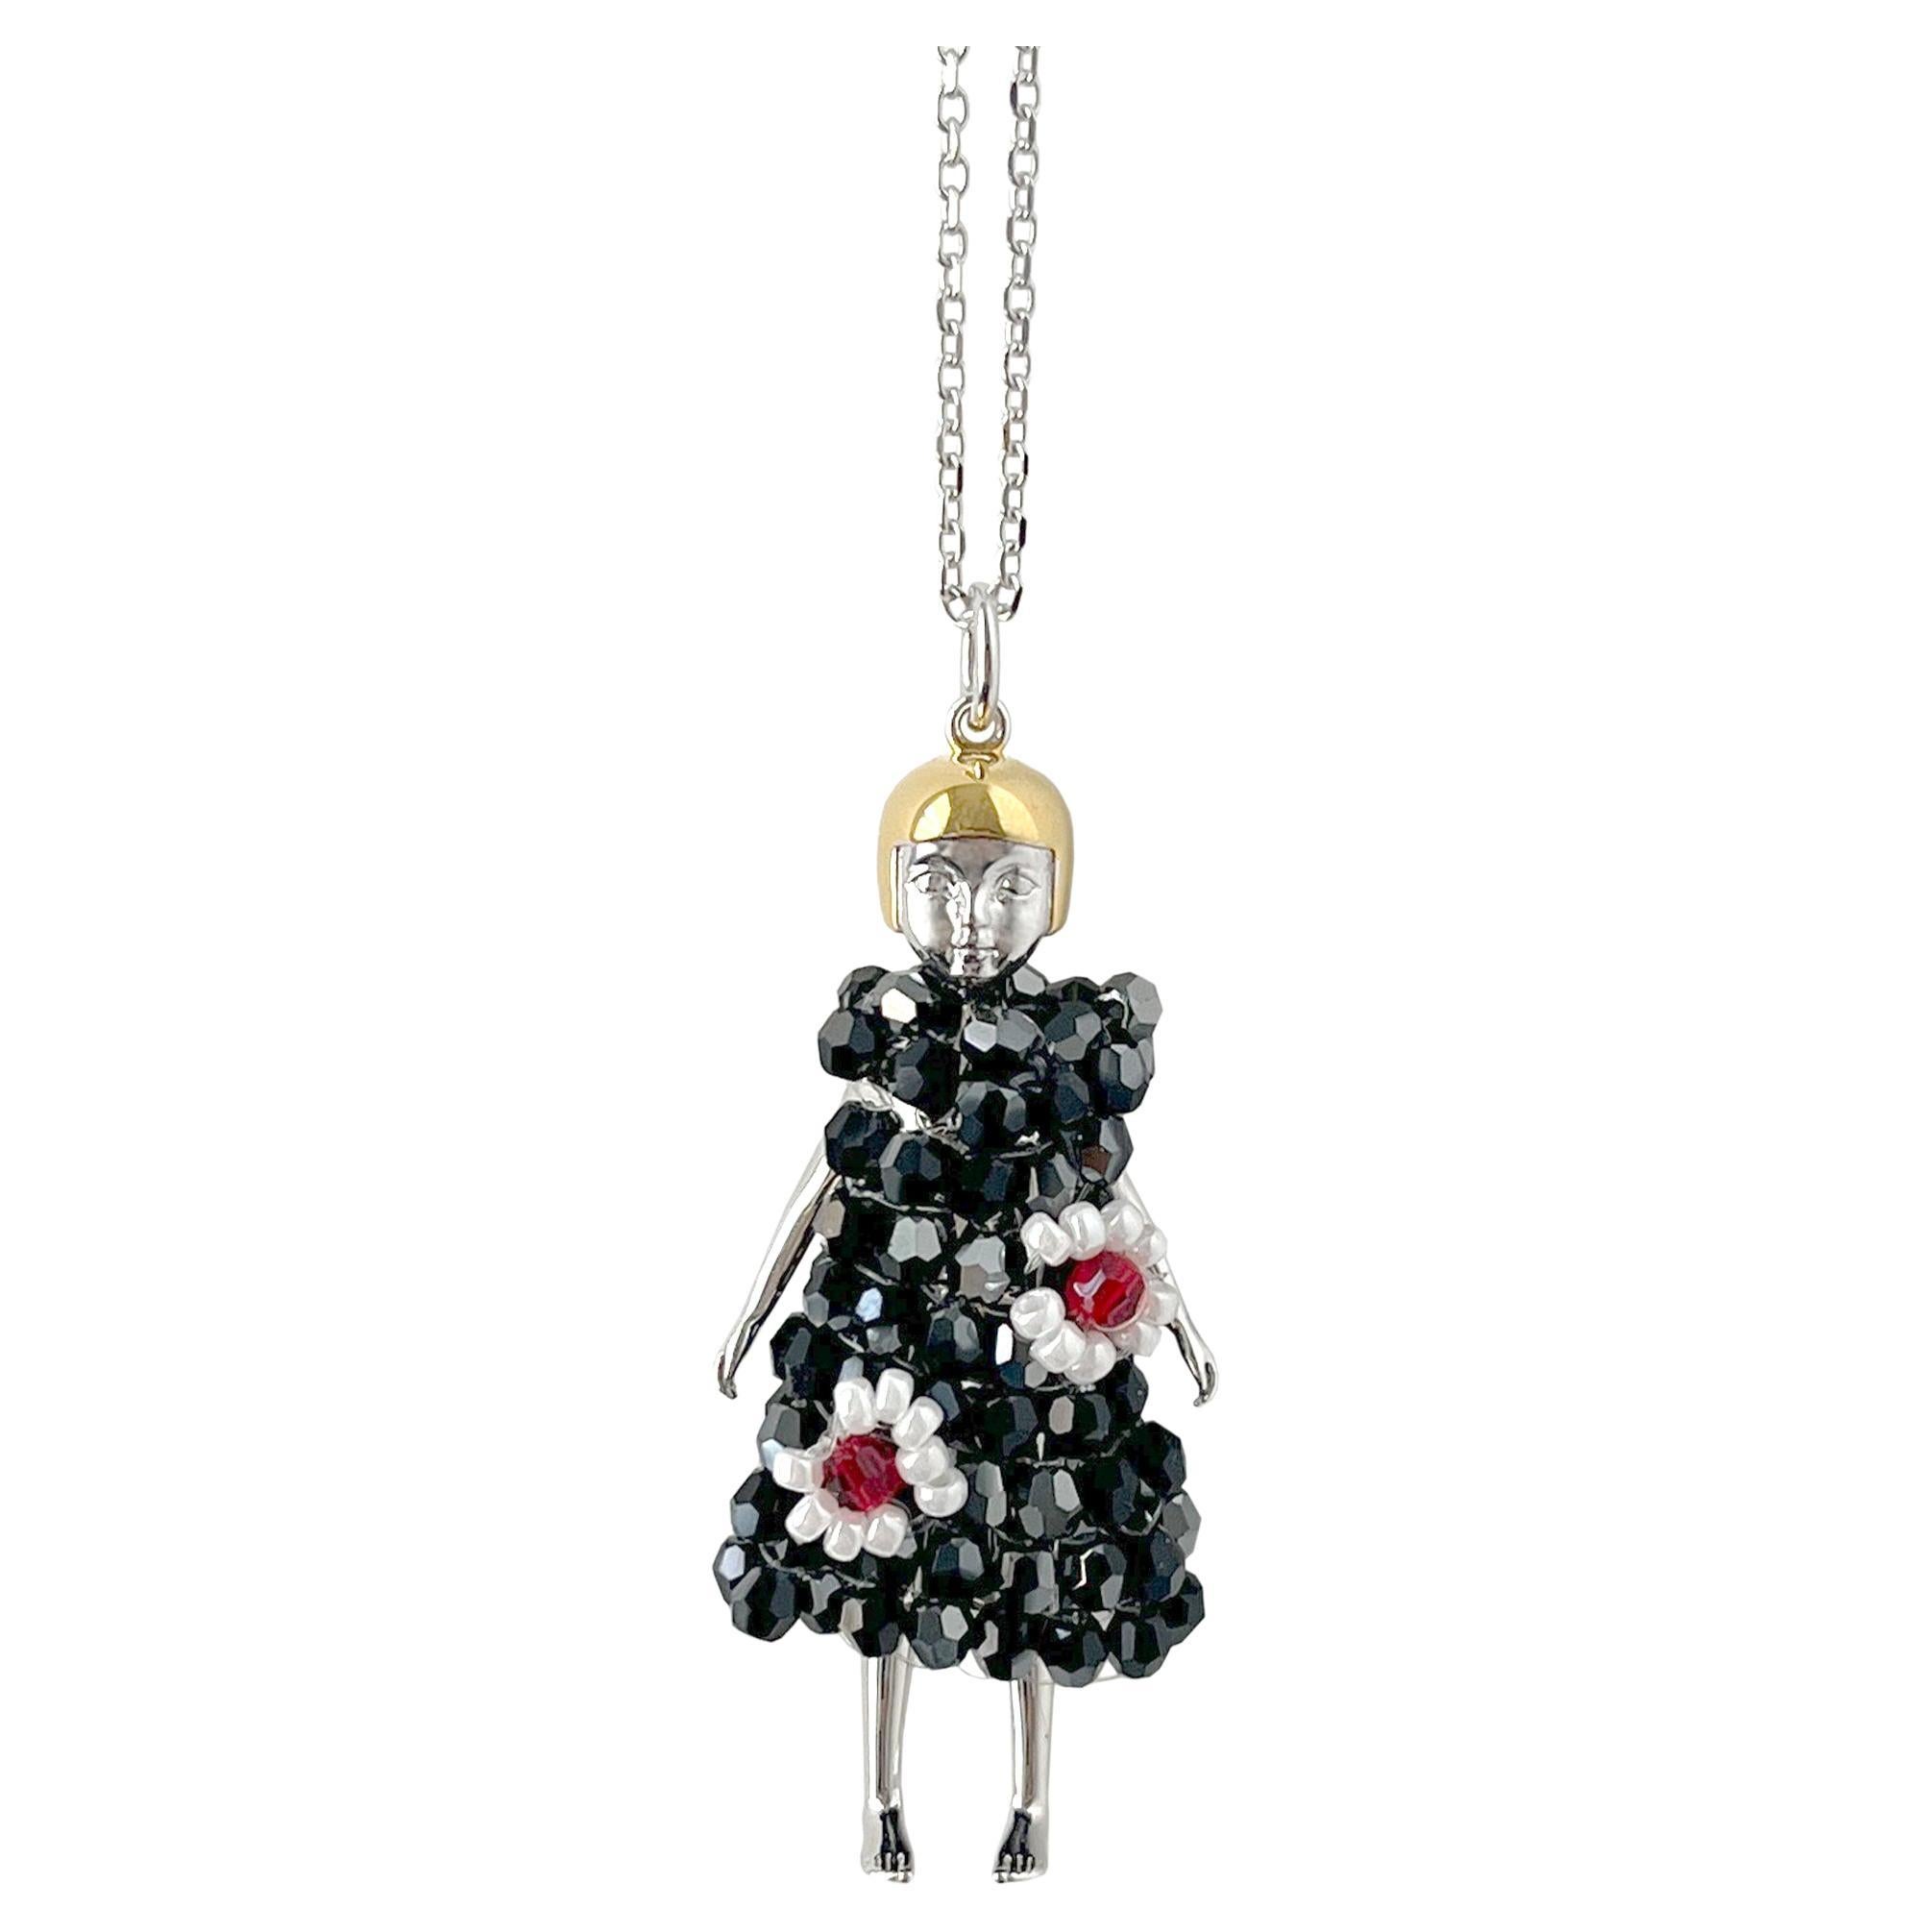 Doll Necklace with Black Flower Dress For Sale